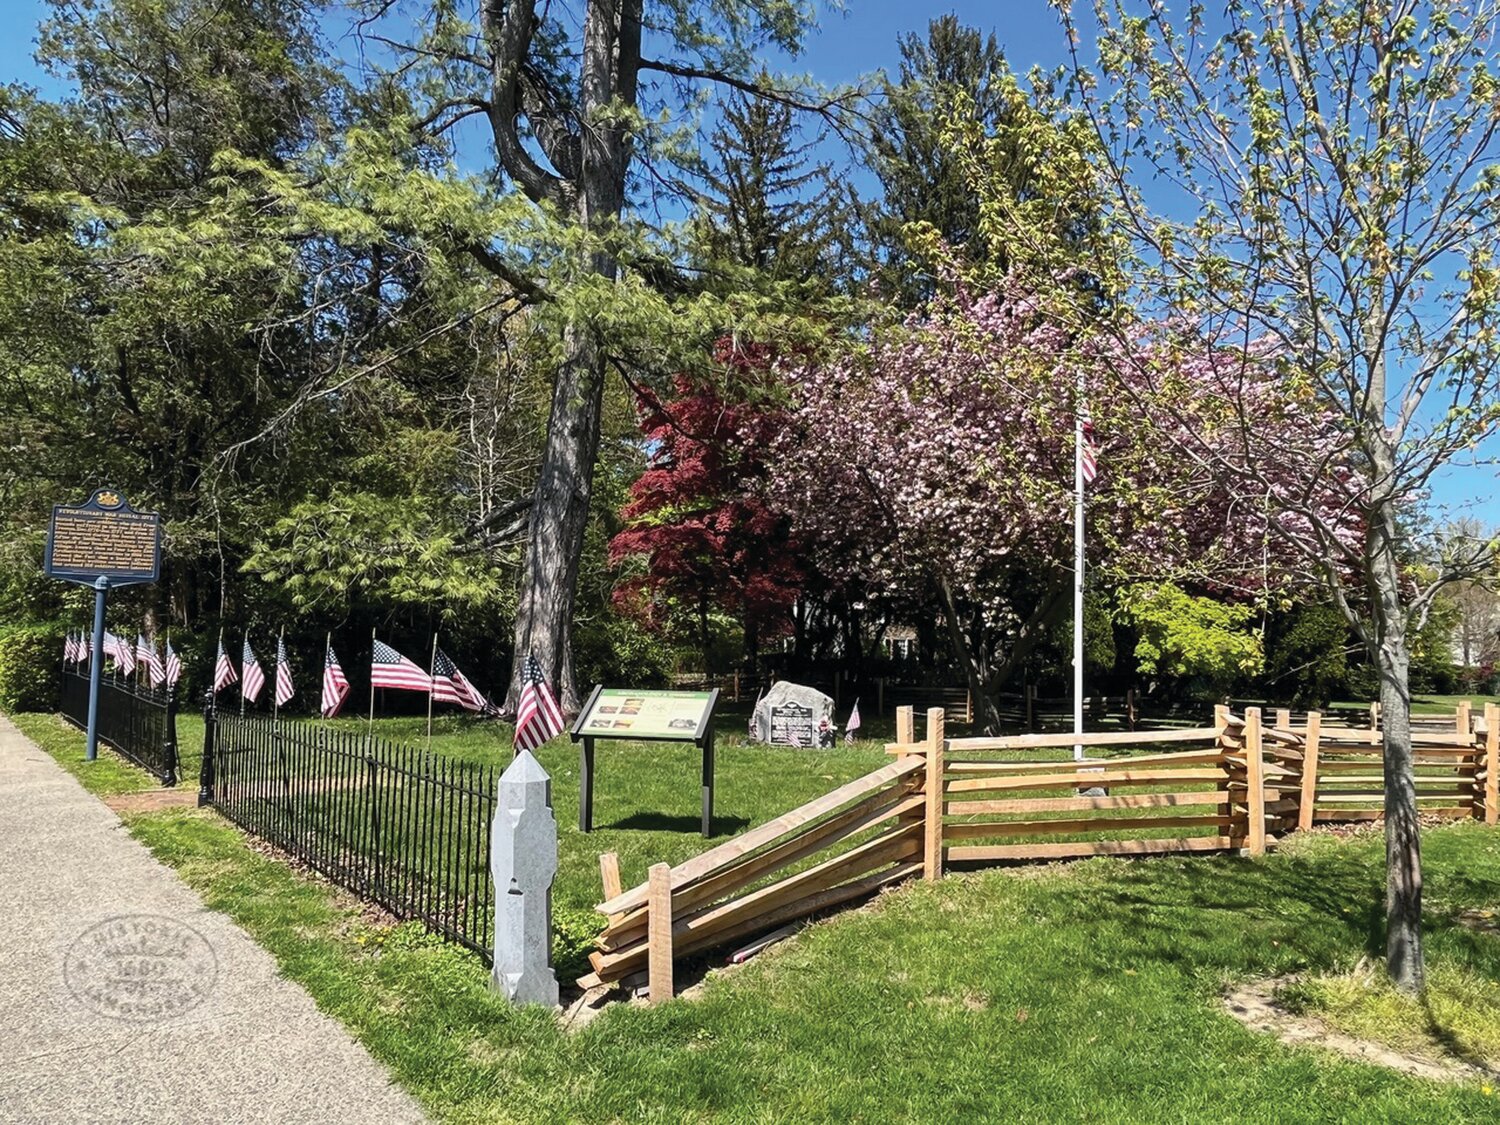 A Revolutionary War burial site is located at South Bellevue and Flowers avenues in Langhorne.